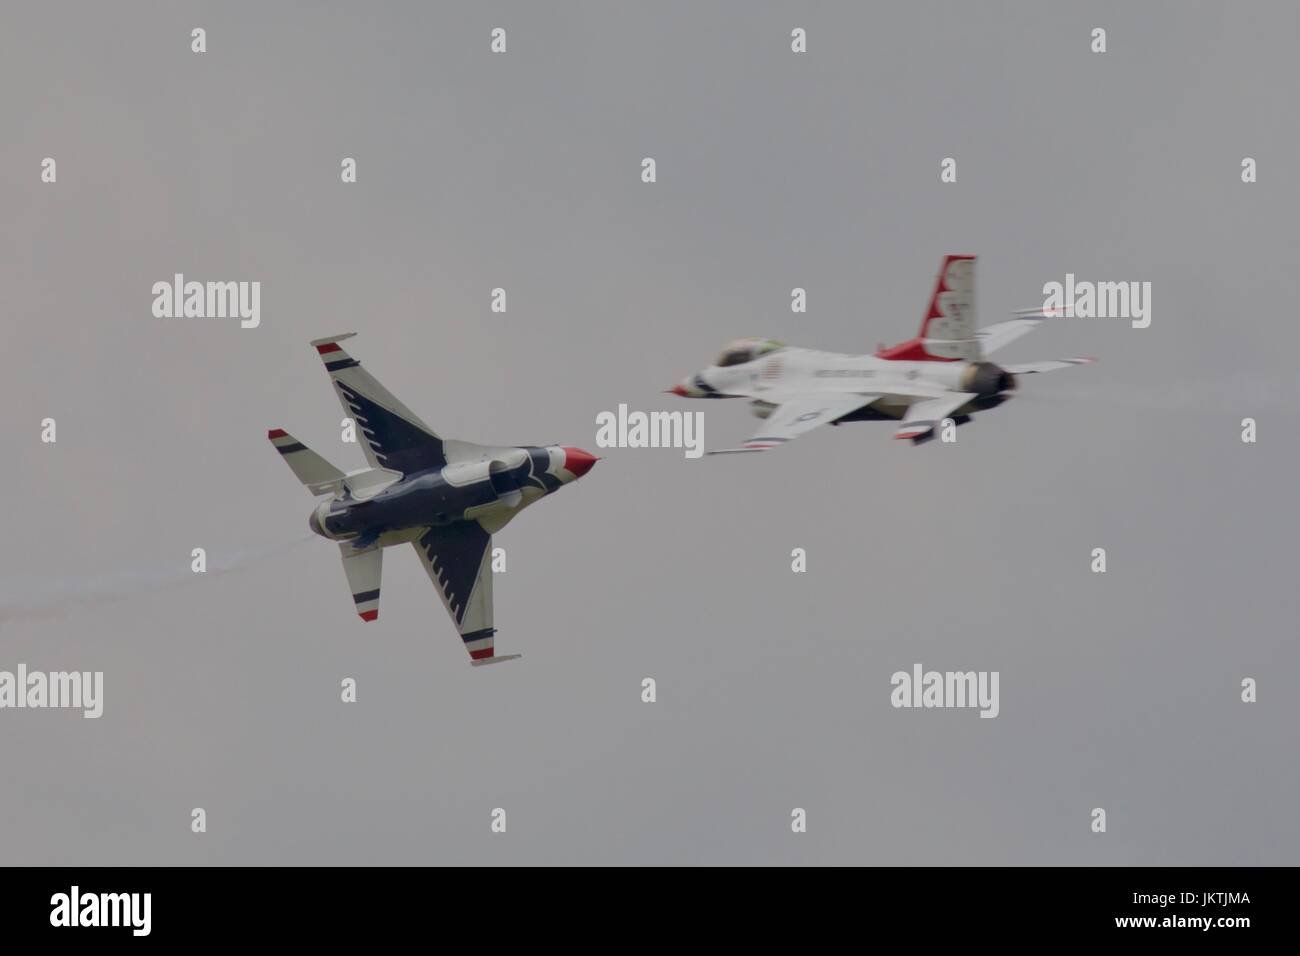 US Air Force Thunderbirds F-16 fighting falcons doing a high speed cross over Stock Photo